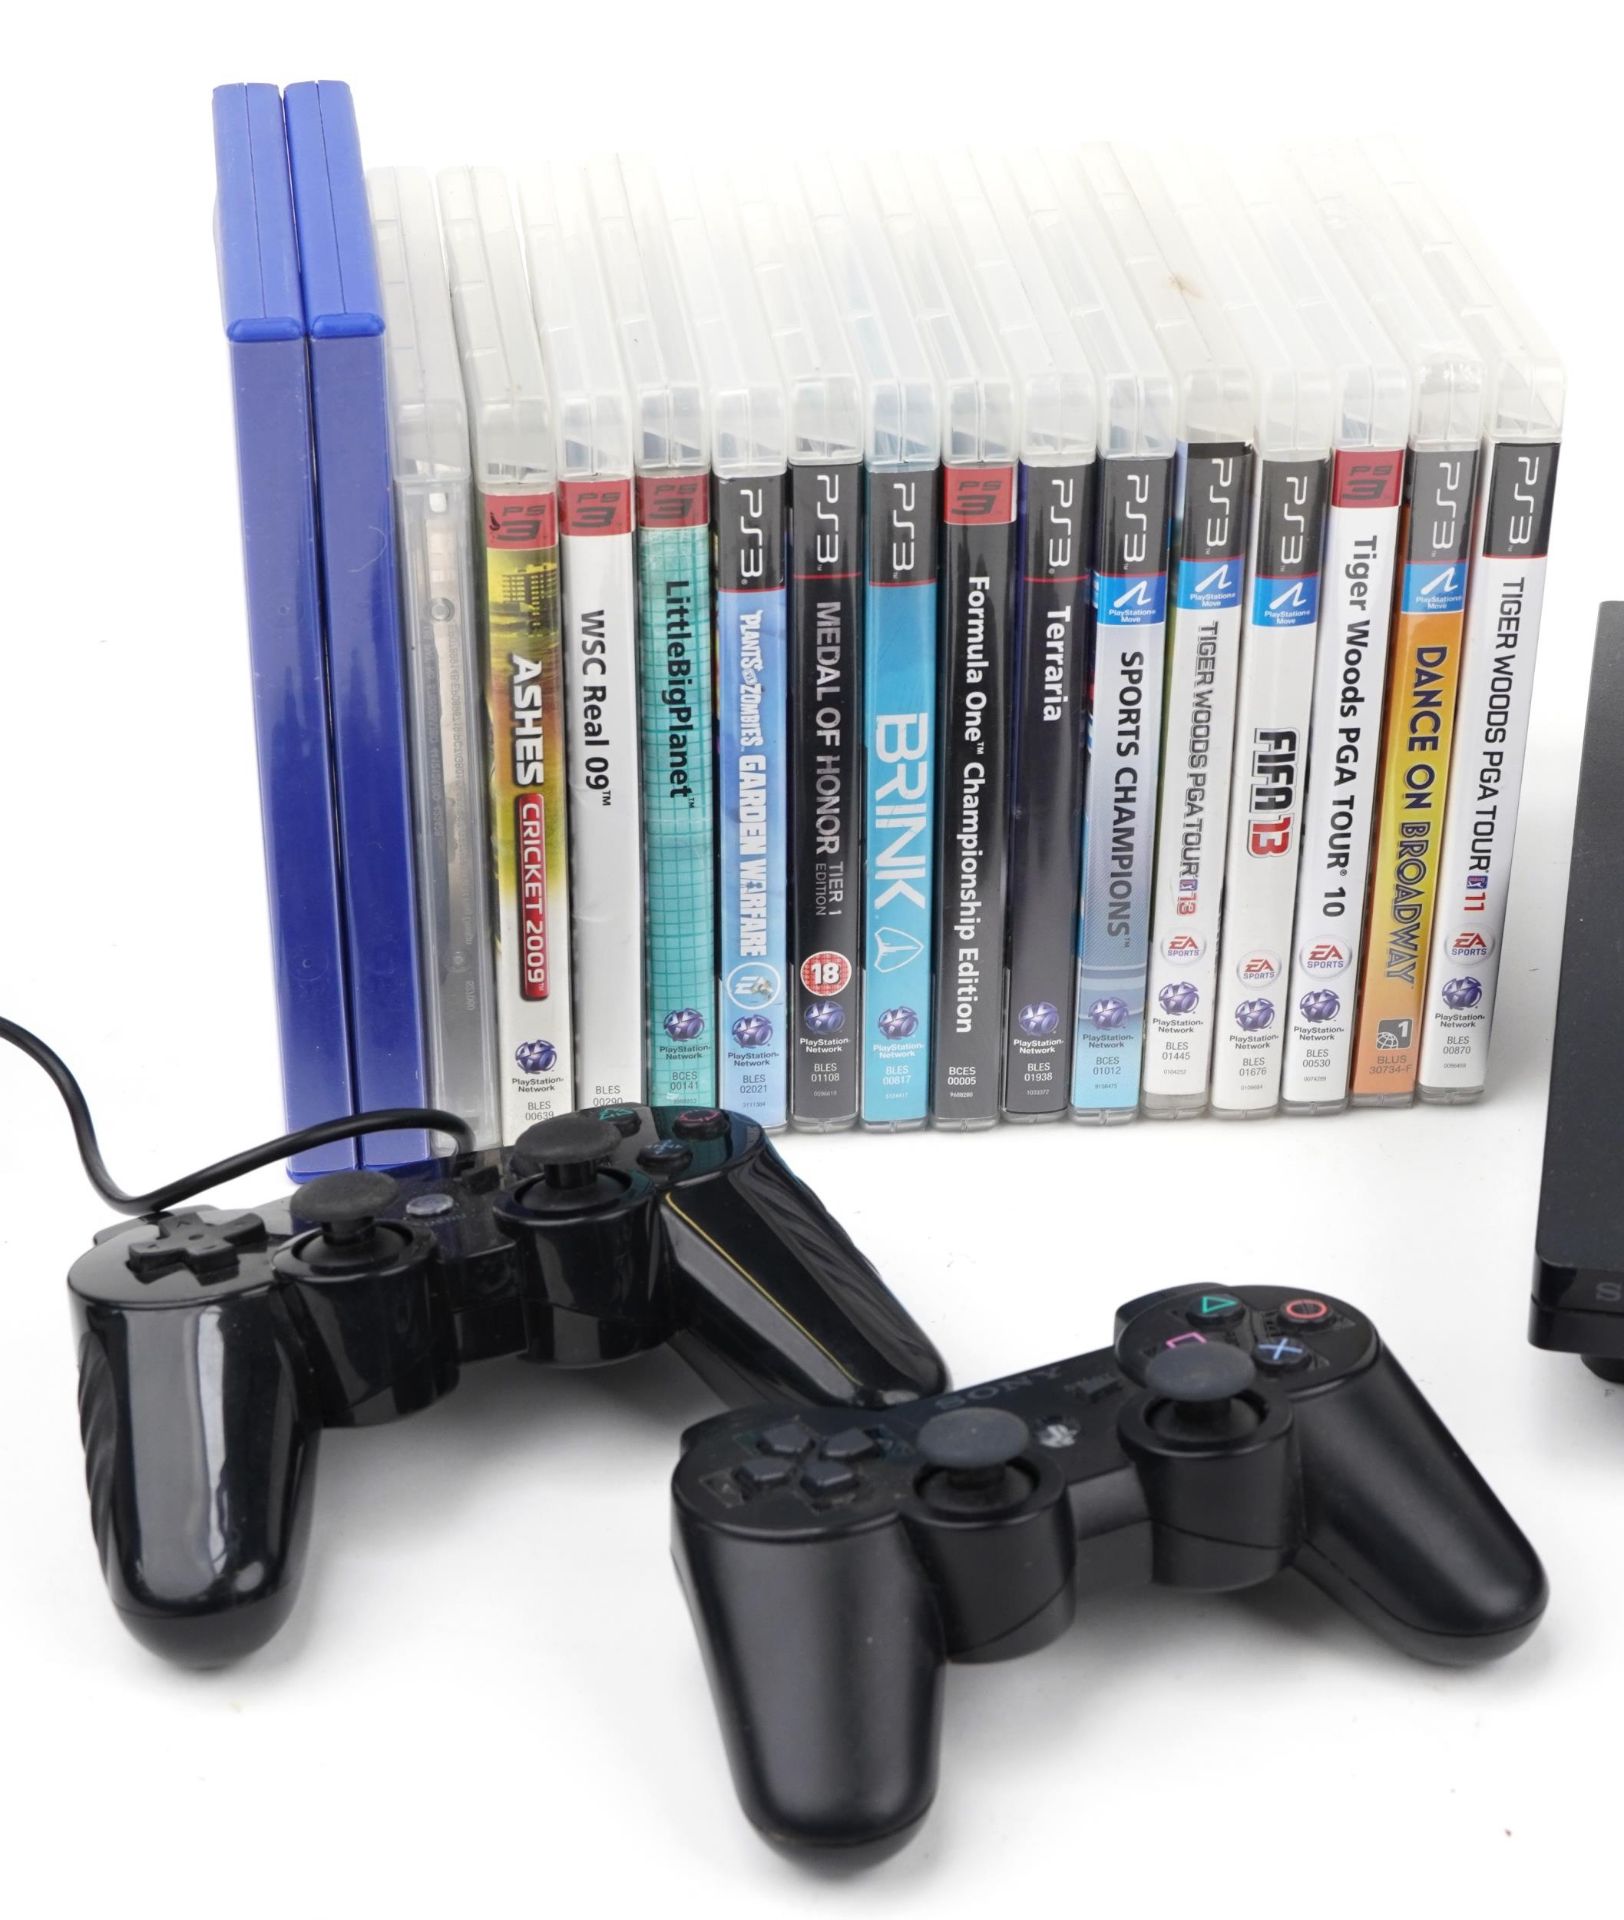 Sony PlayStation 3 games console with controllers and collection of games - Image 2 of 4